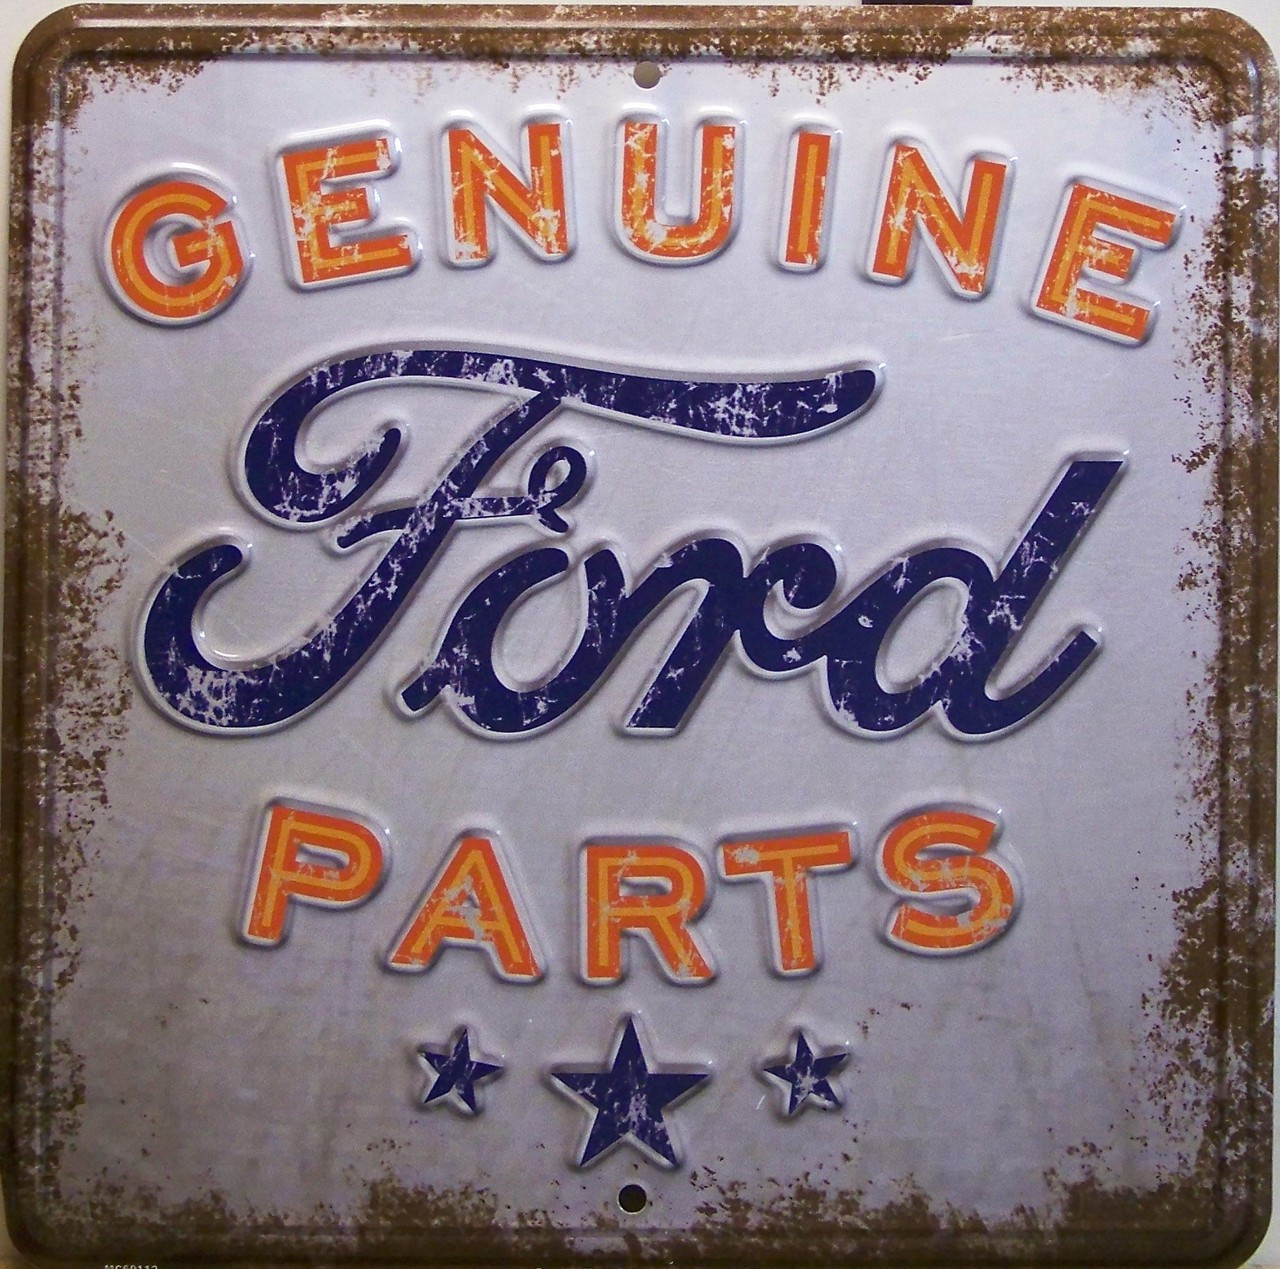 Genuine FORD Parts Used Here Retro Metal Tin Sign